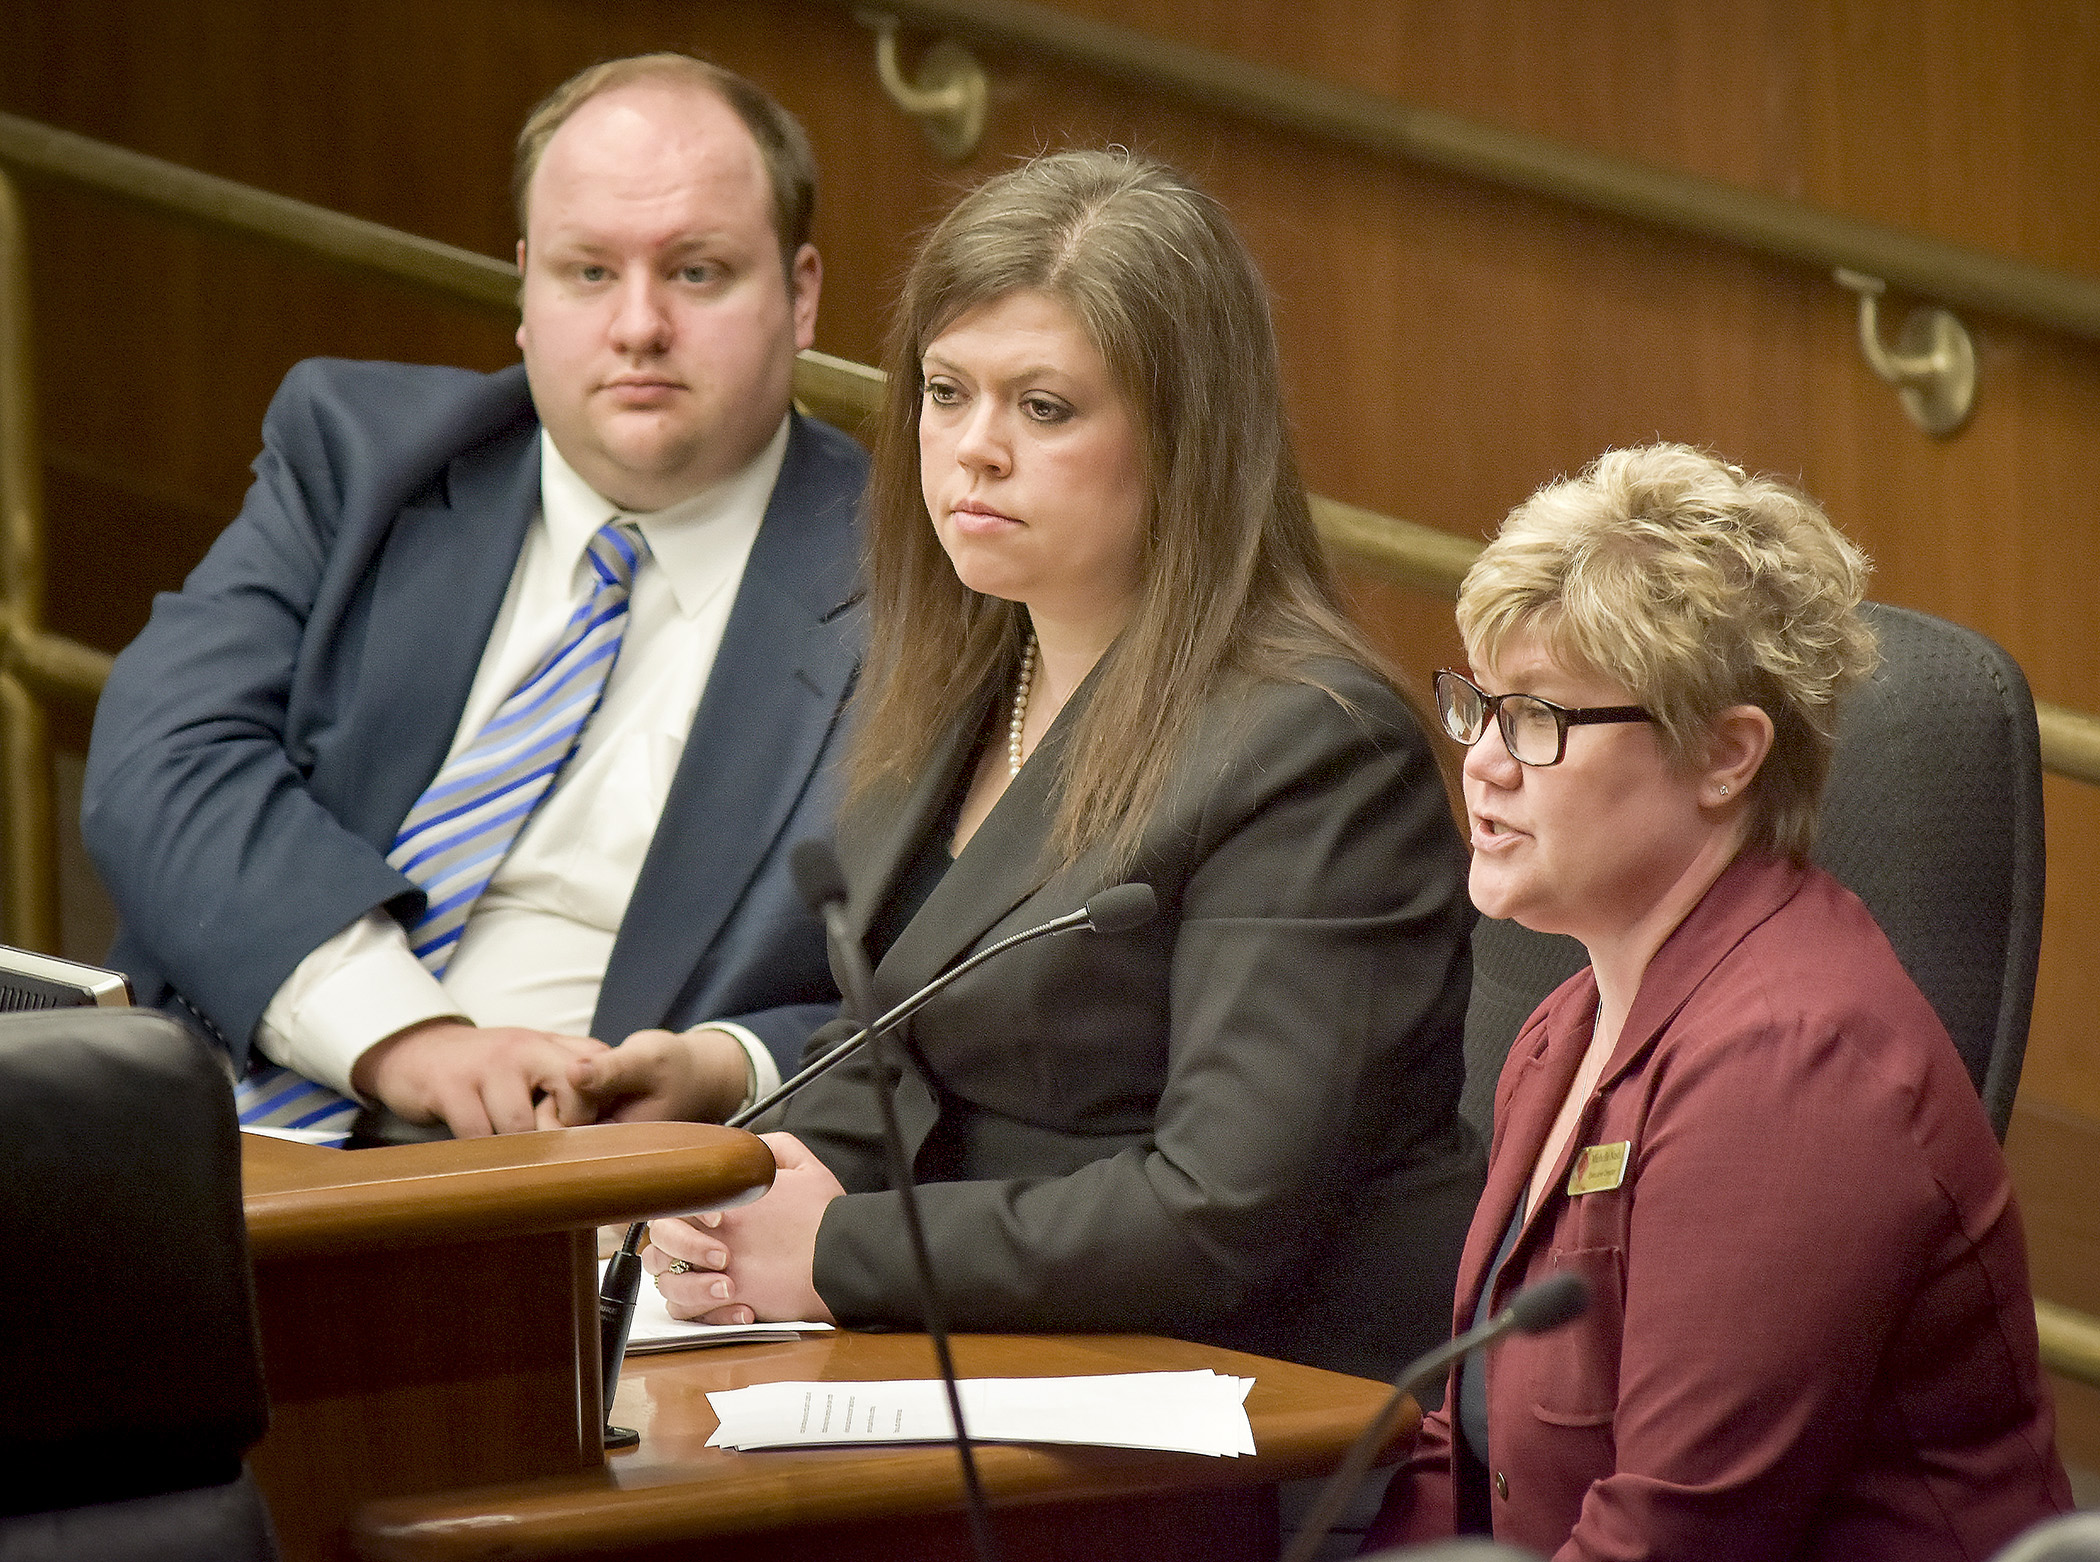 Michelle Nash, right, owner of Legacy Care Home LLC in Minnetonka, and Danielle Lesmeister, center, director of St. Francis Health Services in Morris, testify before the House Subcommittee on Aging and Long-Term Care Feb. 15 in support of a bill sponsored by Rep. Joe Schomacker, left, that would reform the elderly waiver program. Photo by Andrew VonBank